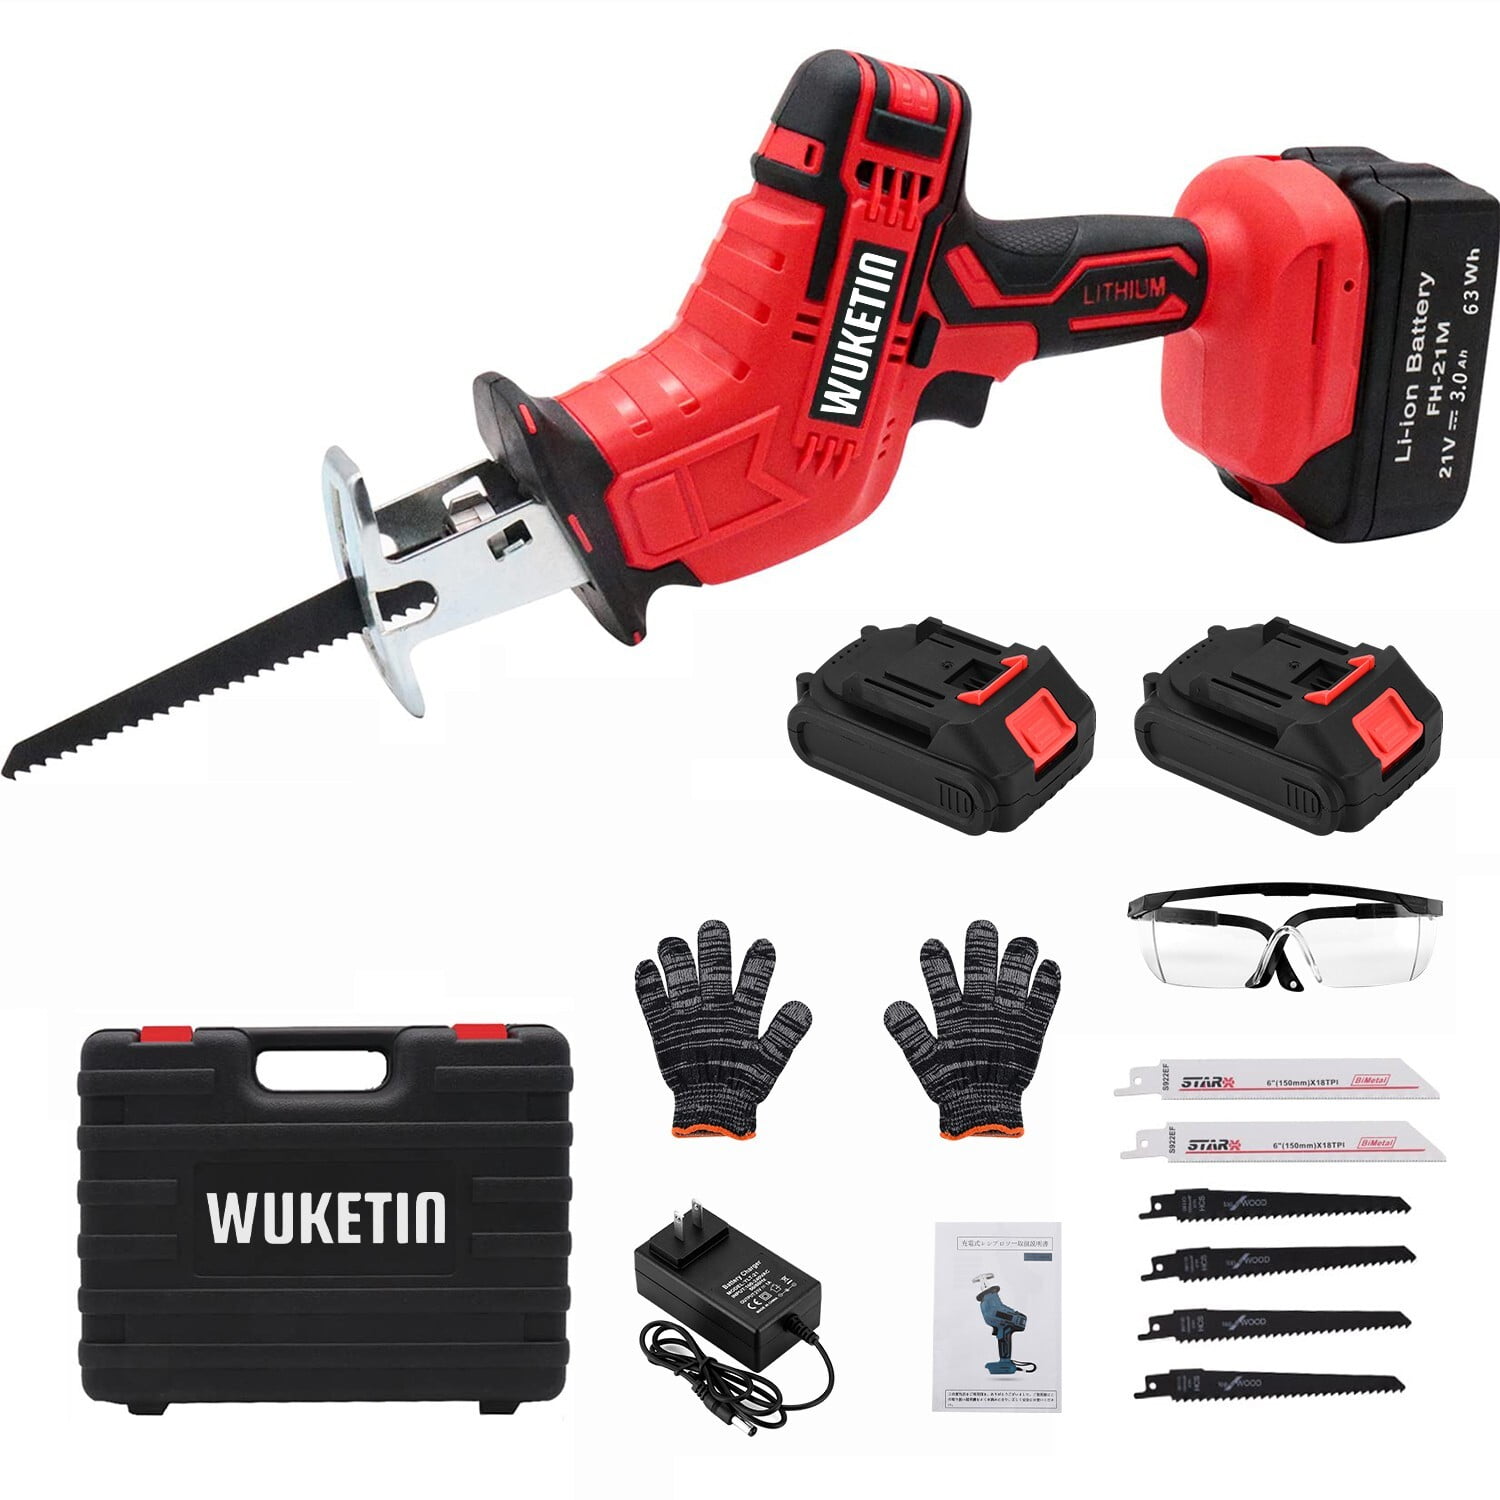 MOTORHEAD 20V ULTRA Cordless Reciprocating Saw, Lithium-Ion, 1” Stroke, 0-3000  SPM, 2Ah Battery, Quick Charger, Blades